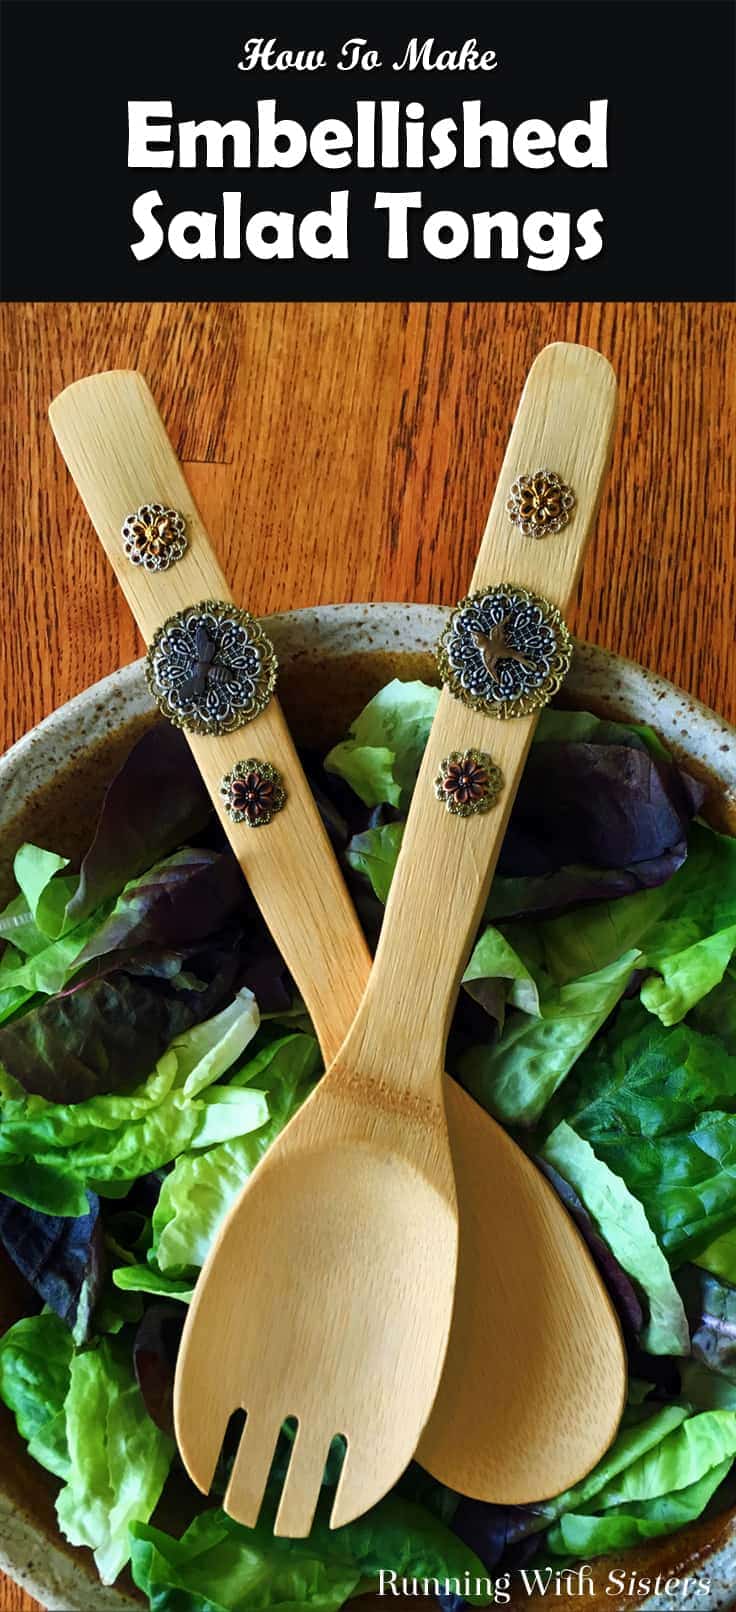 Create Gifty Embellished Salad Tongs using metal filigrees and charms. We'll show you how with this video tutorials and step by step instructions.